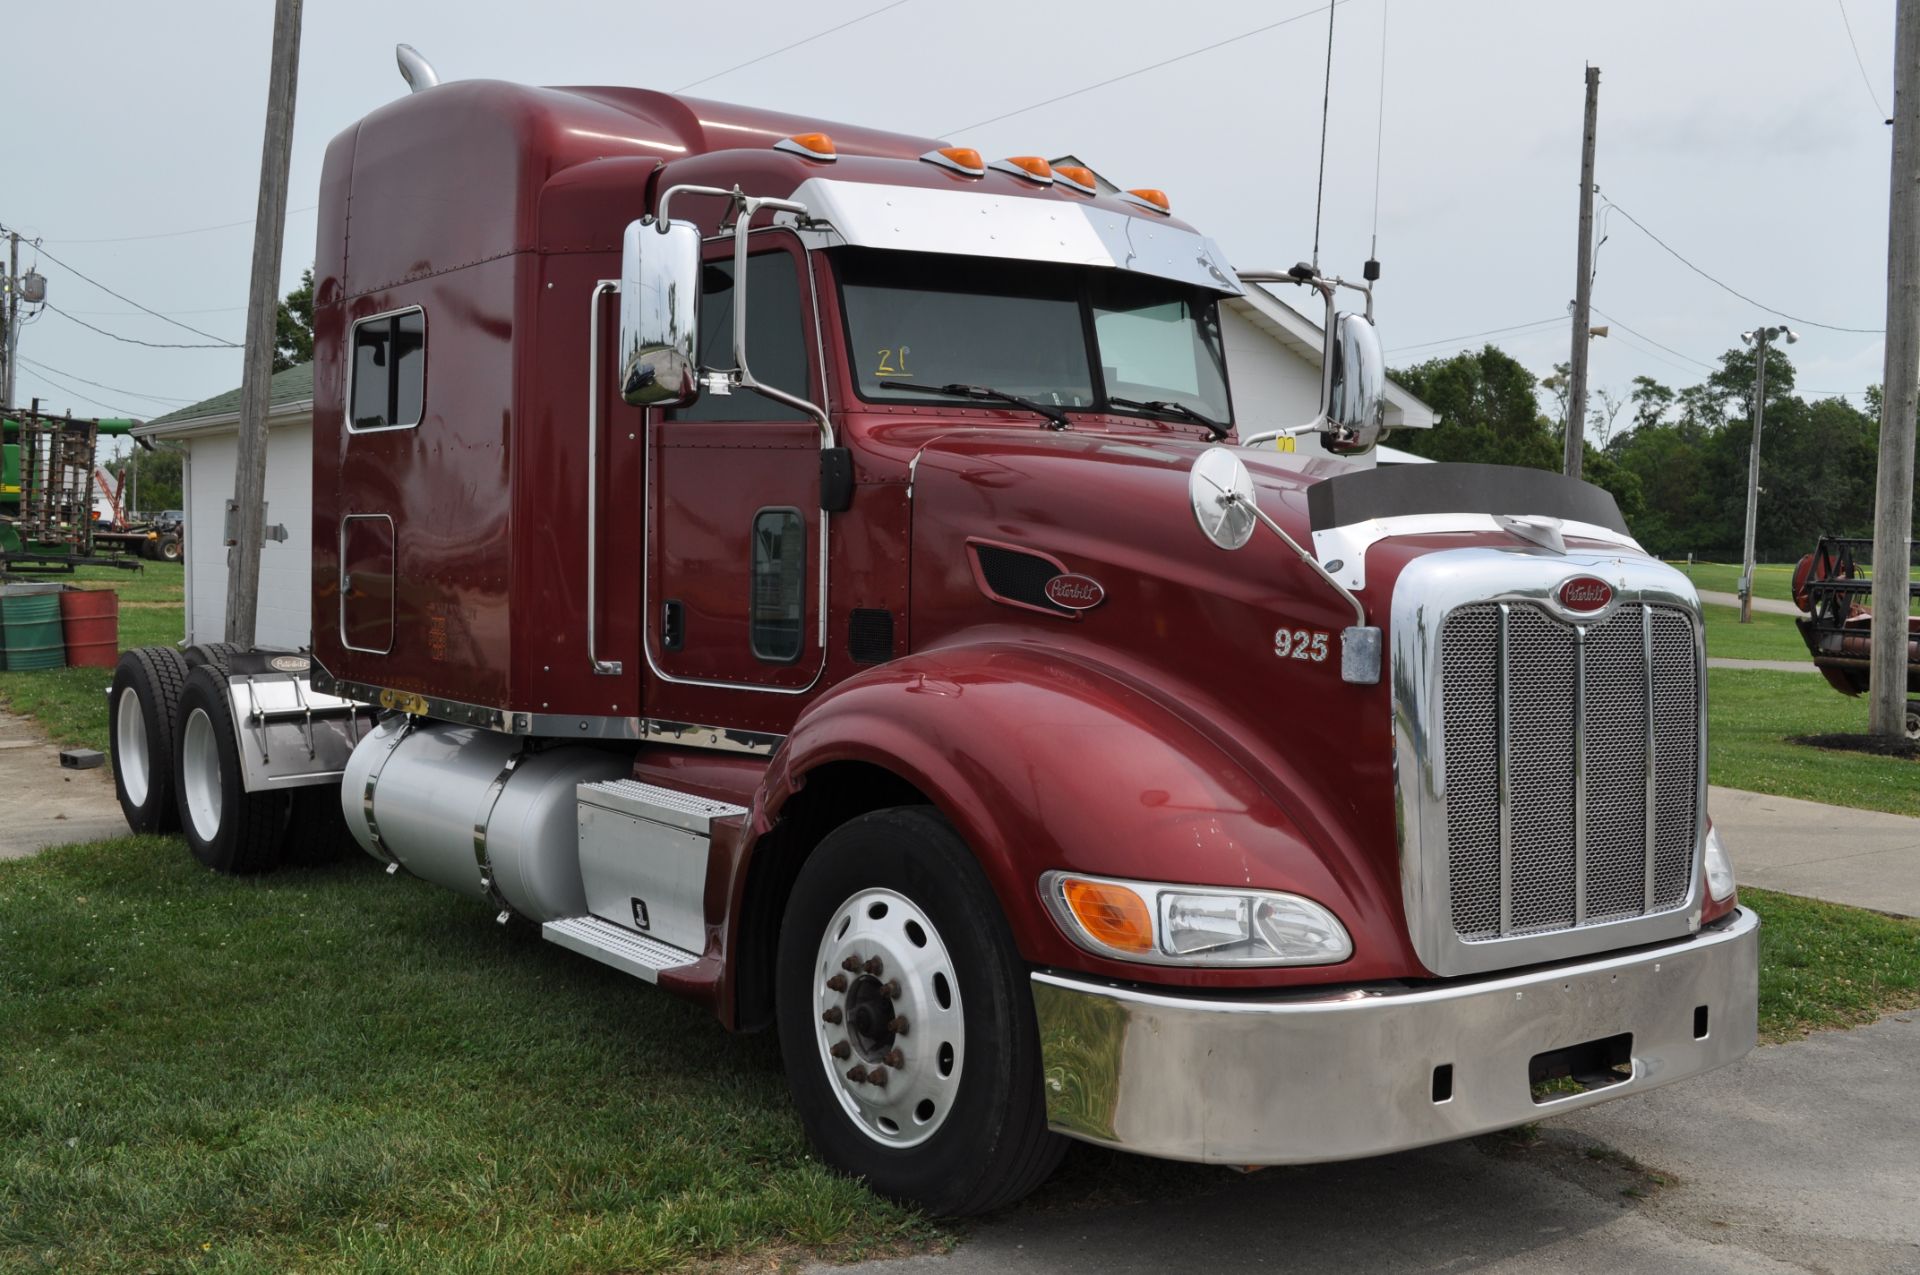 2012 Peterbilt Sleeper Semi Truck, 386 model, chassis weight 17836, Paccar MX 13 motor, - Image 2 of 20